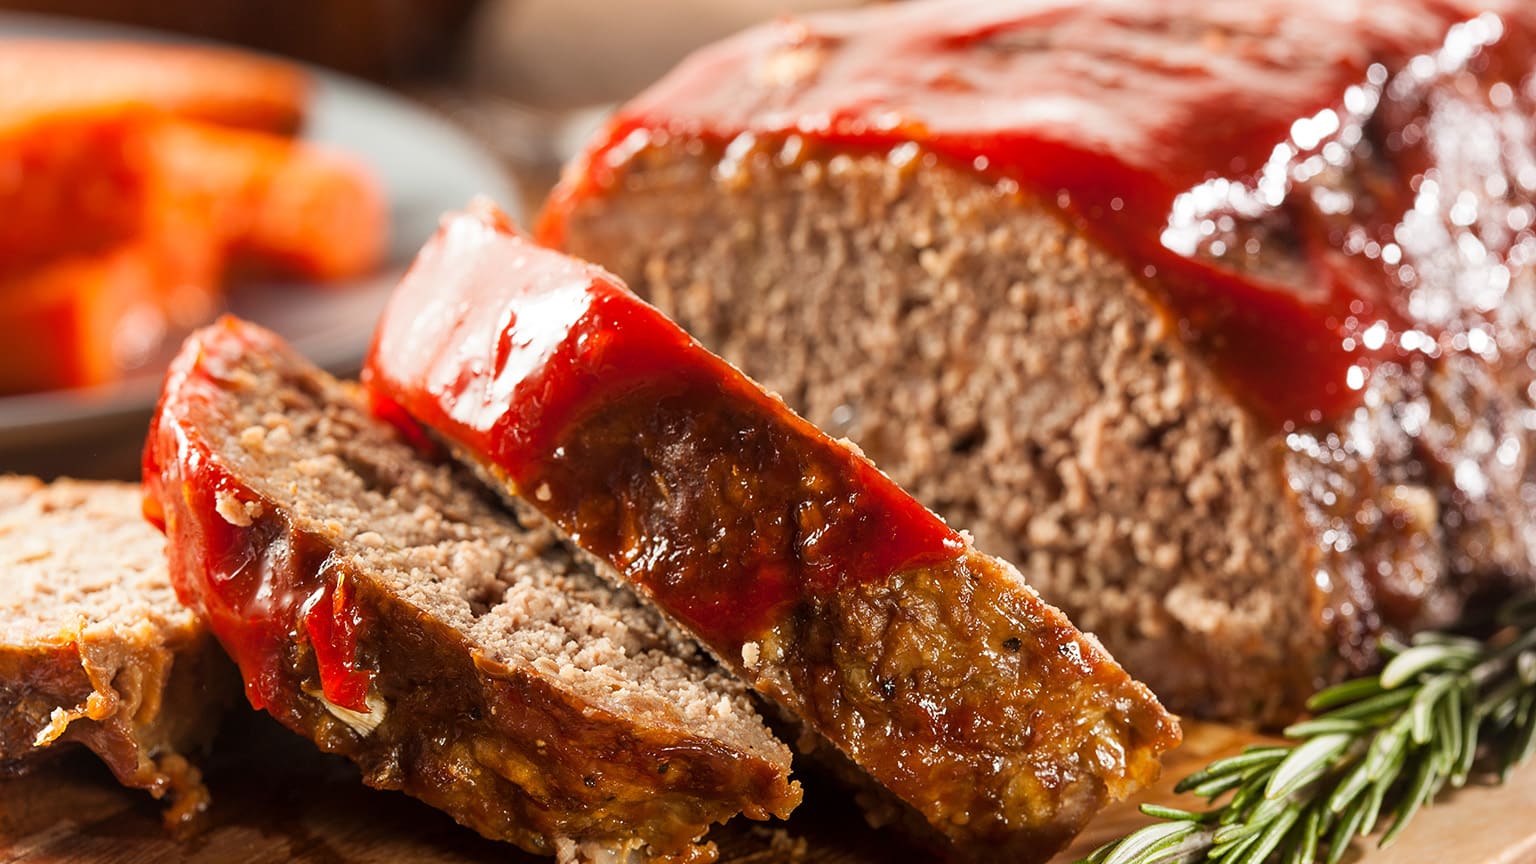 Slices of meatloaf covered in red sauce on a cutting board